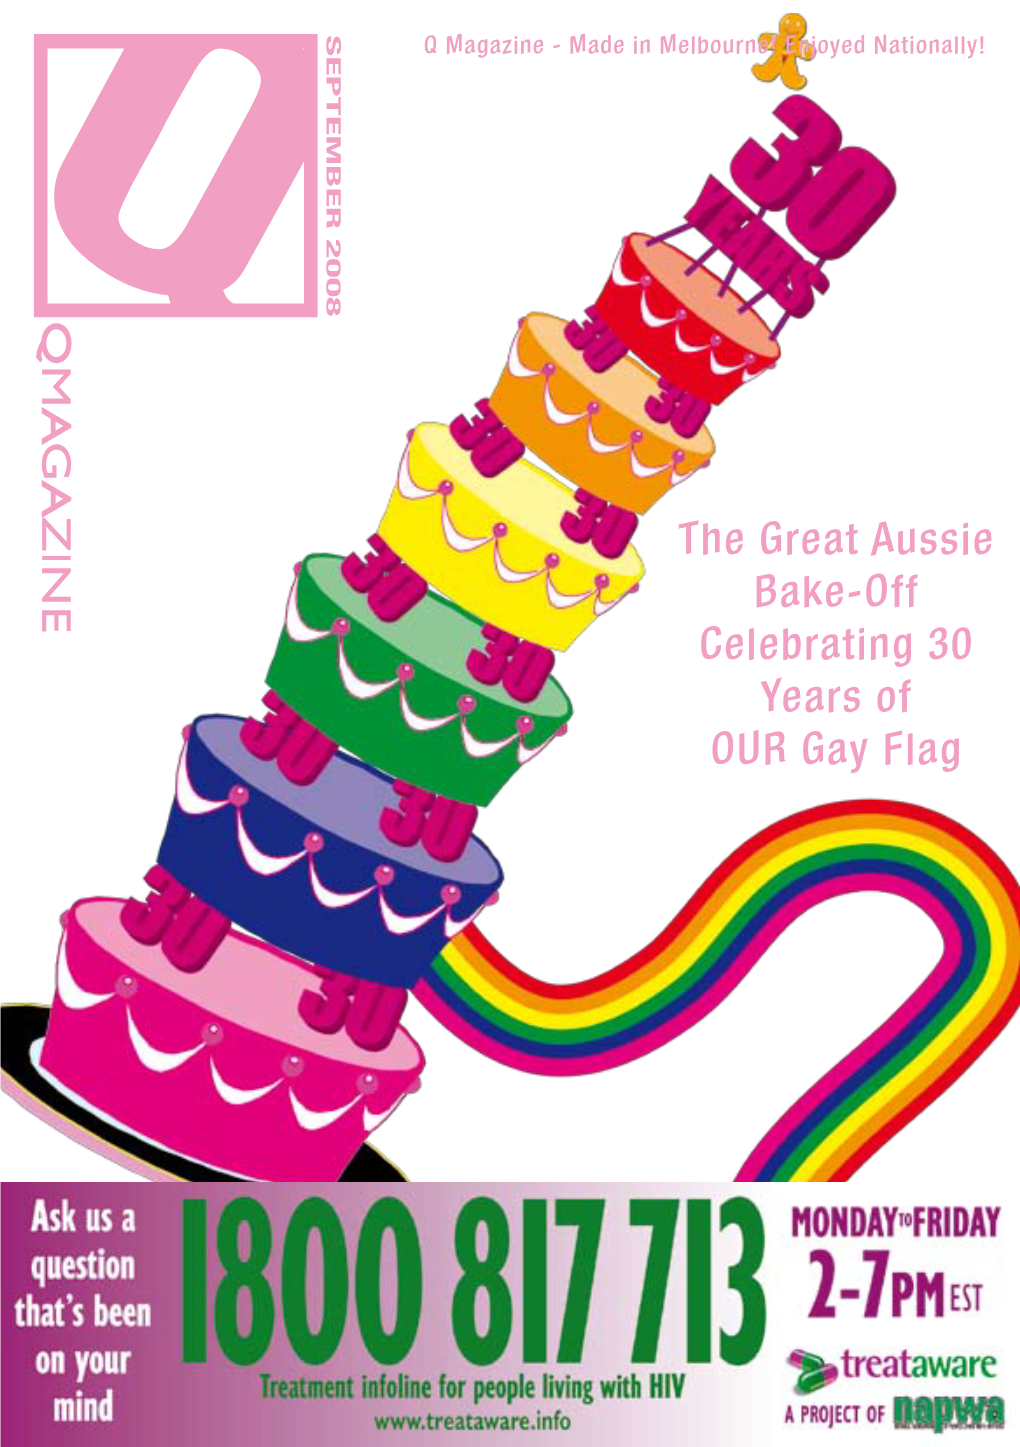 The Great Aussie Bake-Off Celebrating 30 Years of OUR Gay Flag